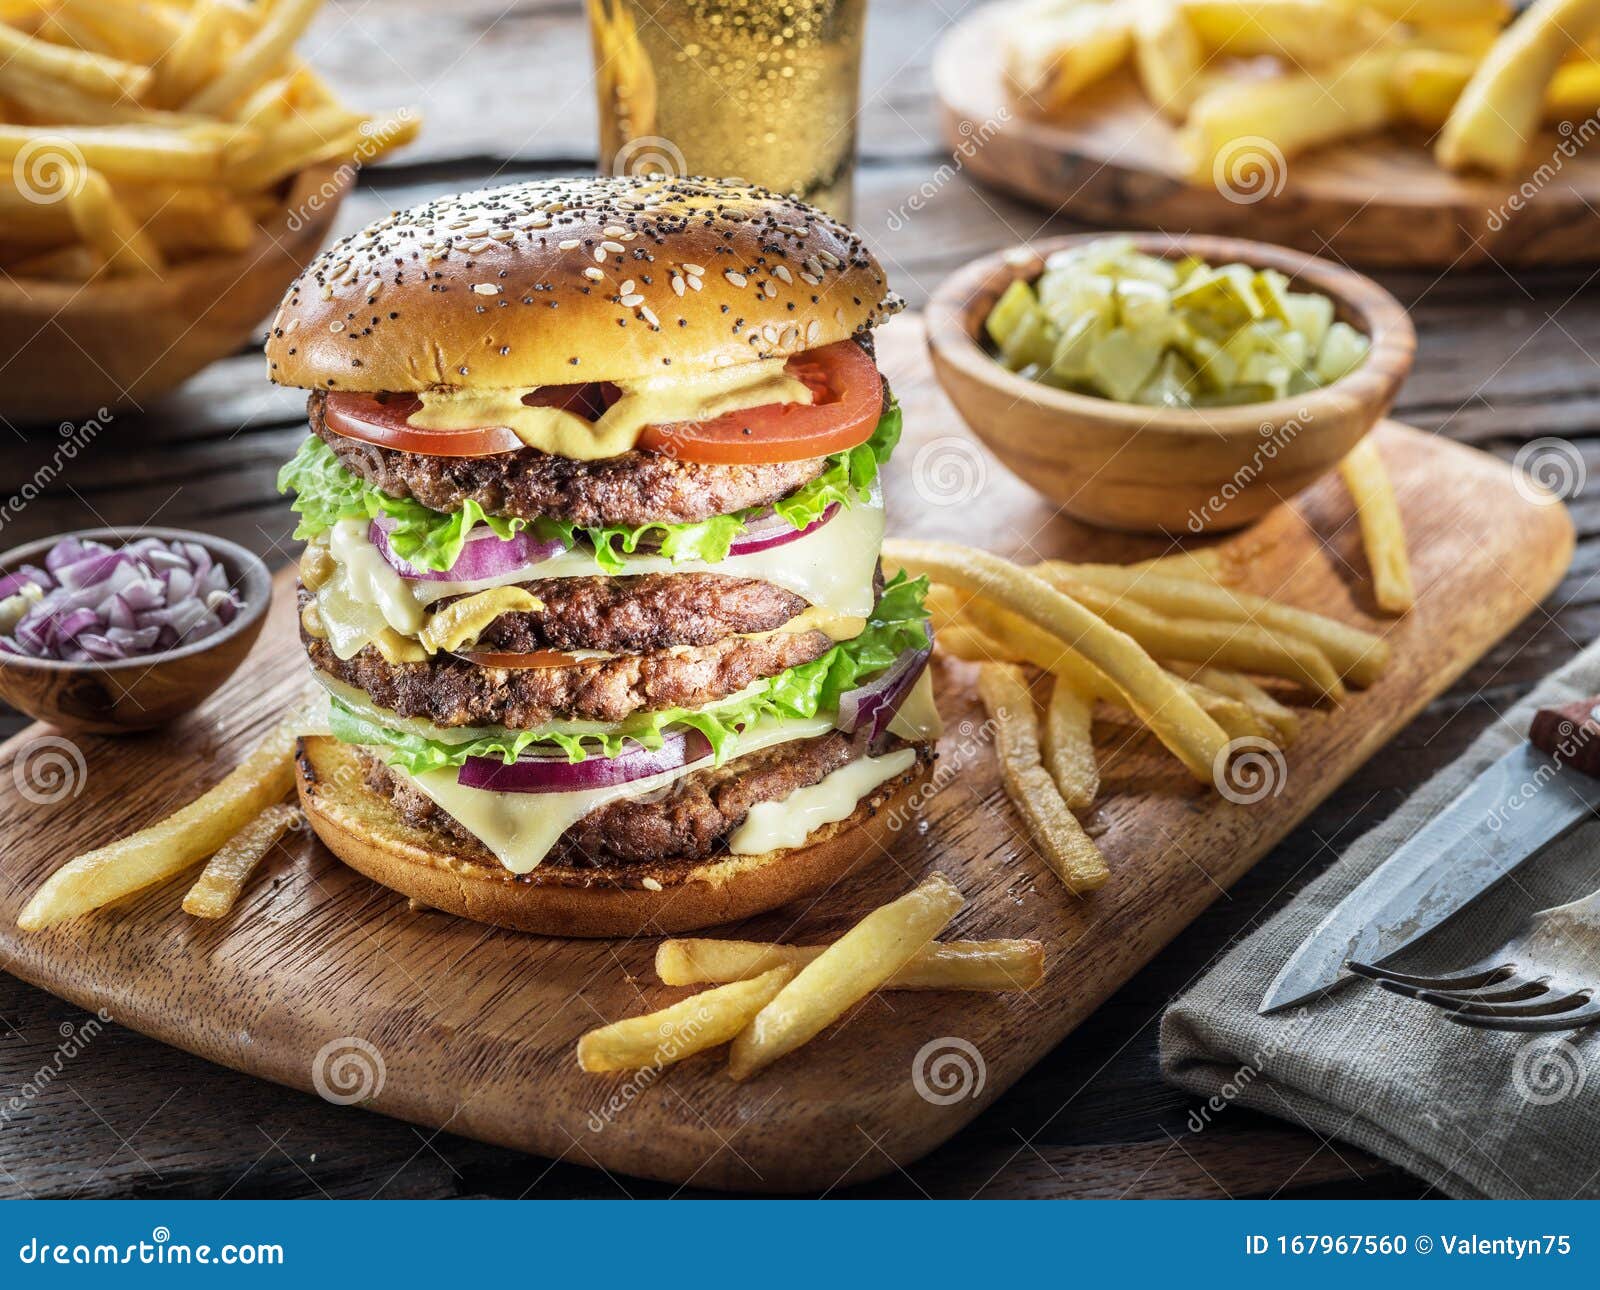 Big Hamburger And French Fries On The Wooden Tray Stock Photo Image